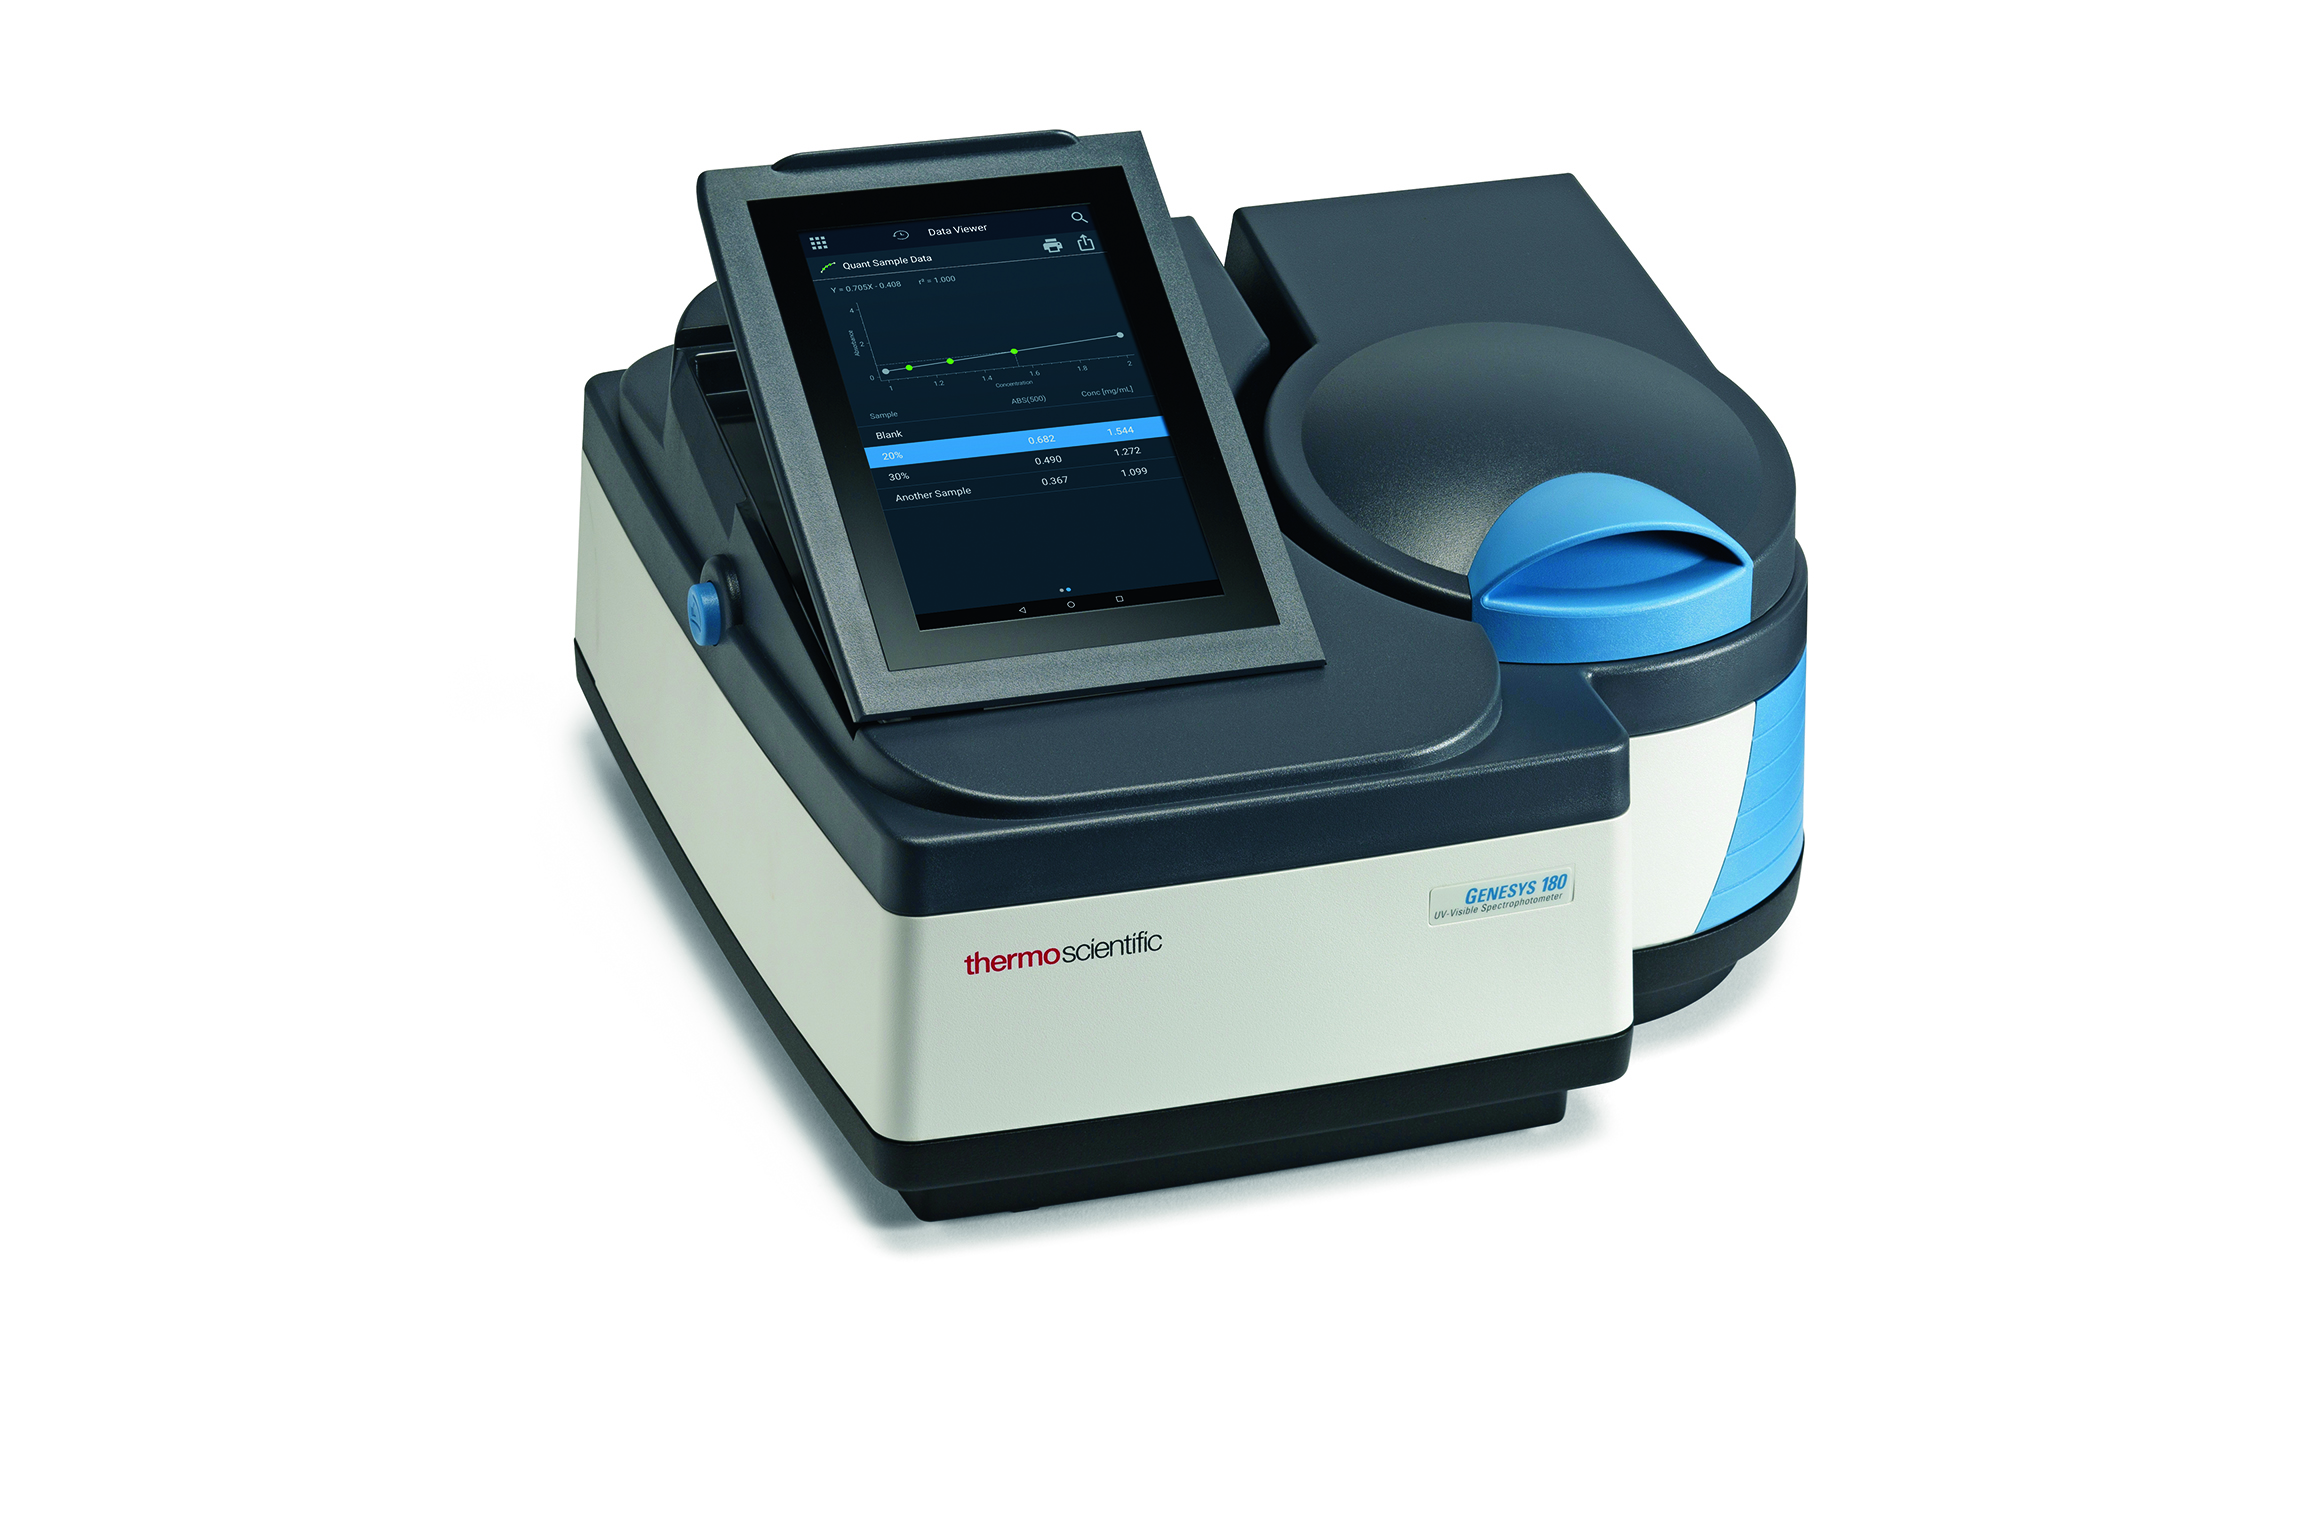 The Thermo Scientific GENESYS 180 UV-Vis spectrophotometer.